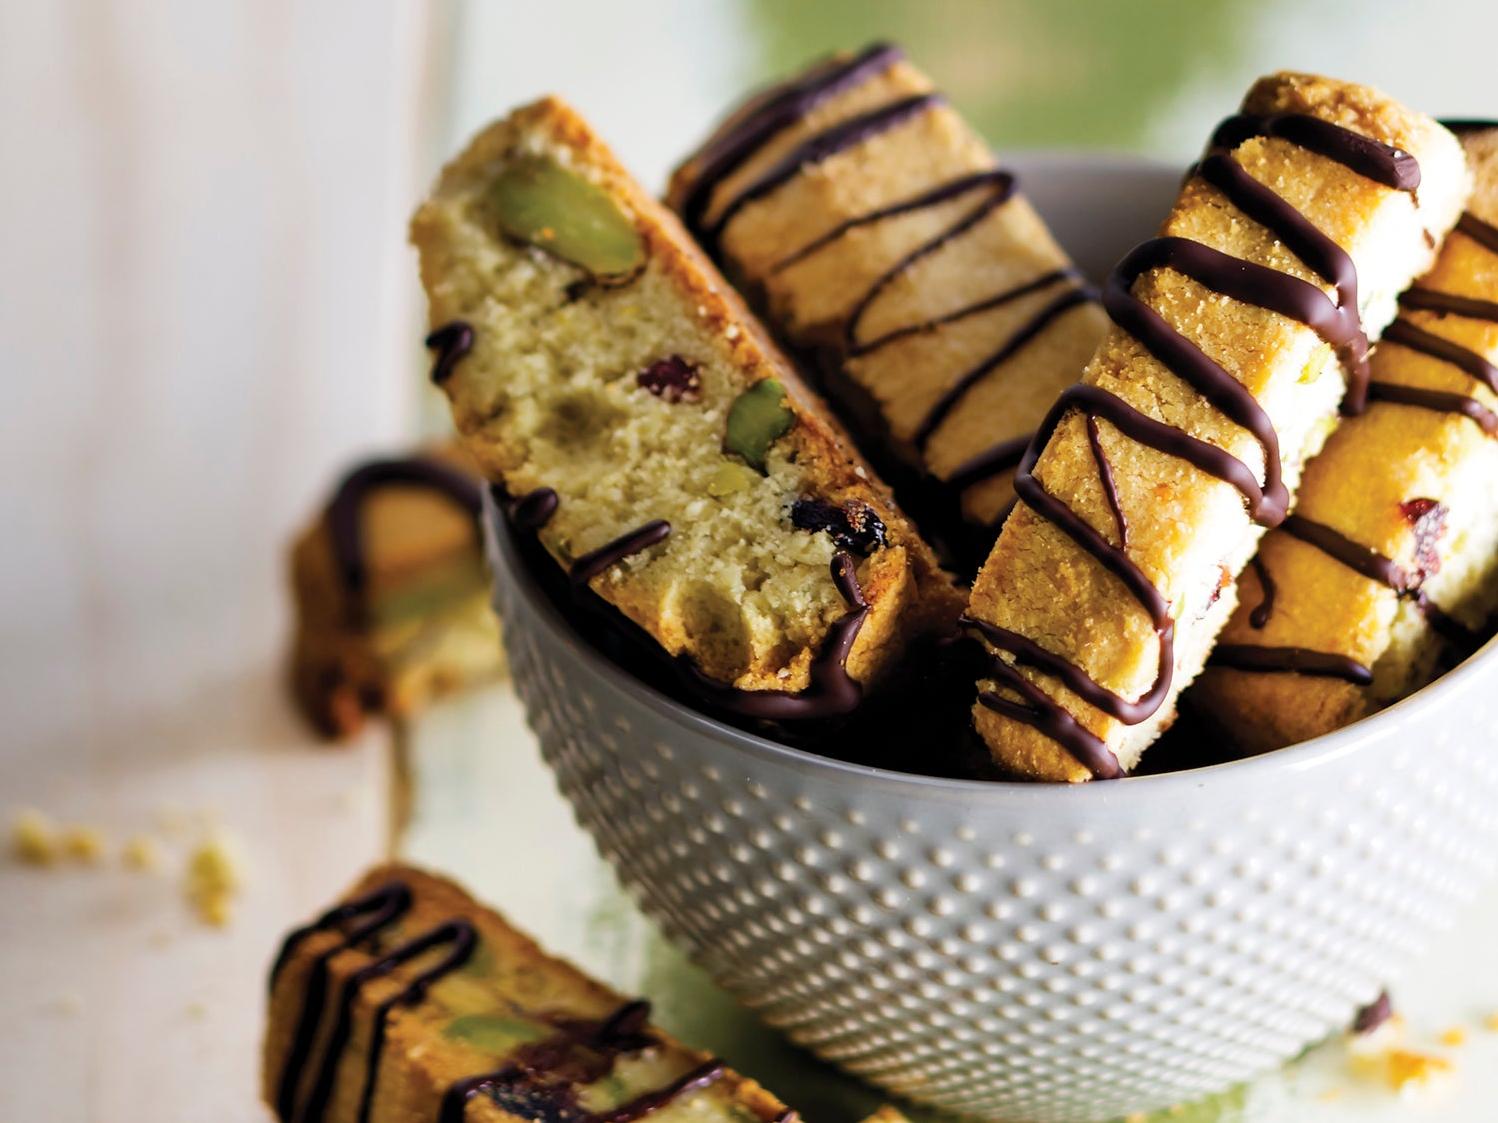  A gluten-free recipe that will satisfy your sweet tooth.